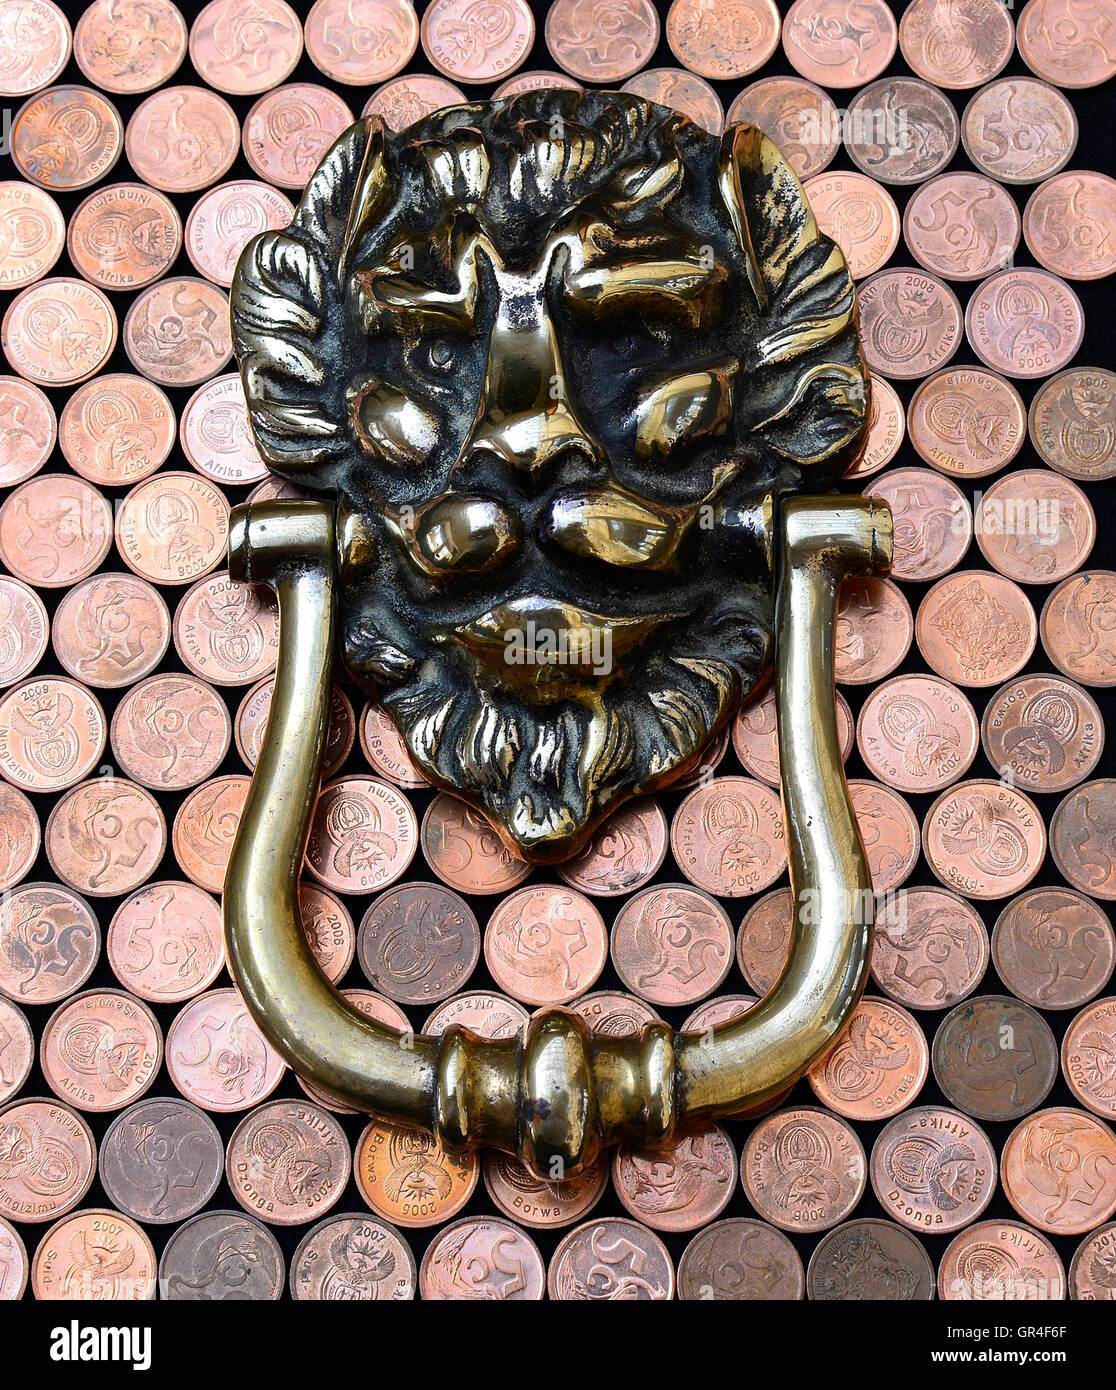 Opportunity knocking. Knocking for opportunity to profit. Brass lion head knocker on copper money. Full view. Stock Photo